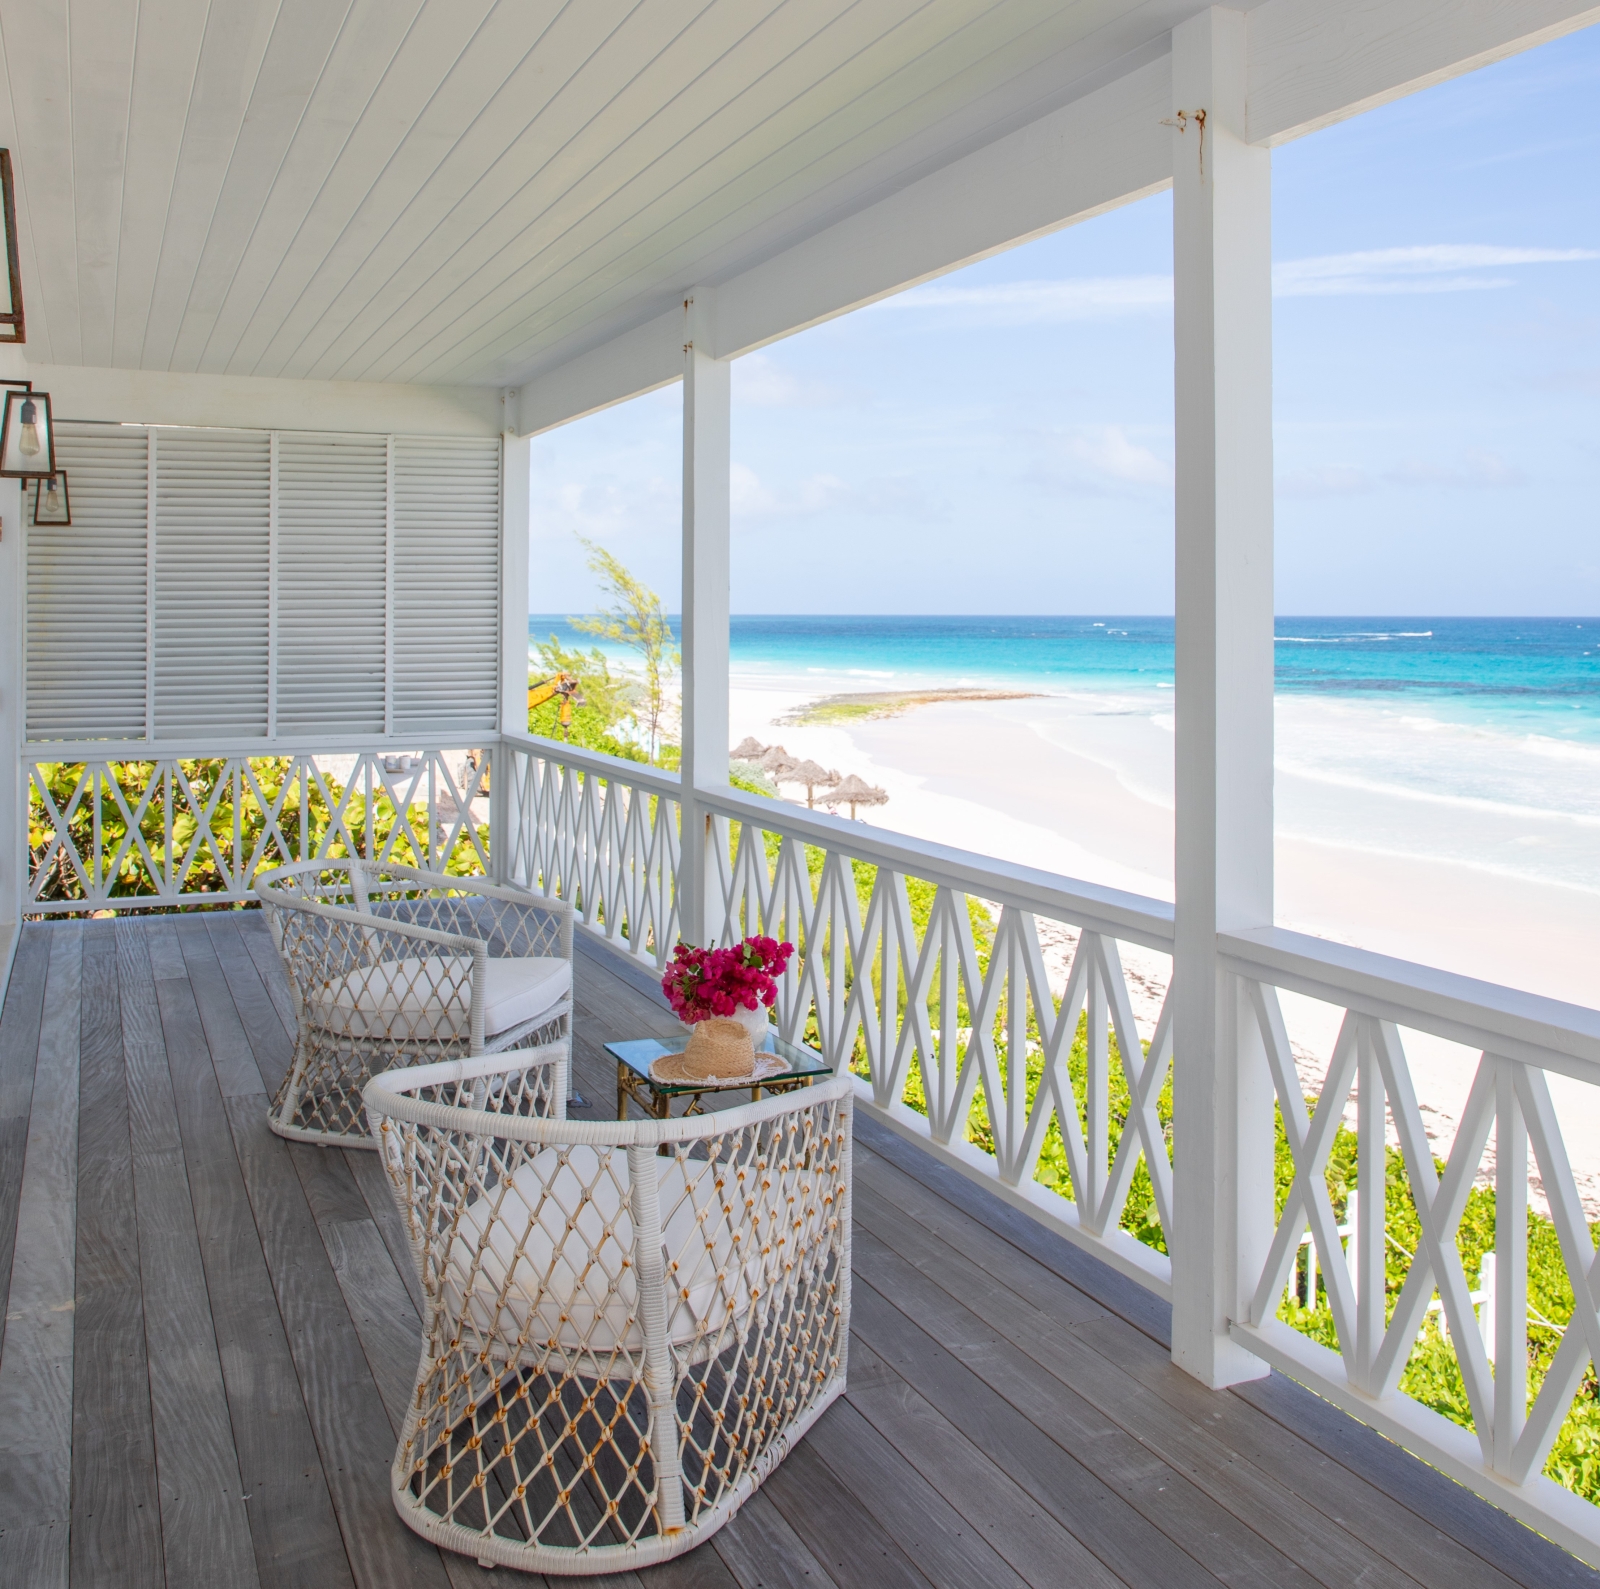 Balcony with comfy chairs, coffee table, flowers and sea view at Sea Siren in the Bahamas, Caribbean